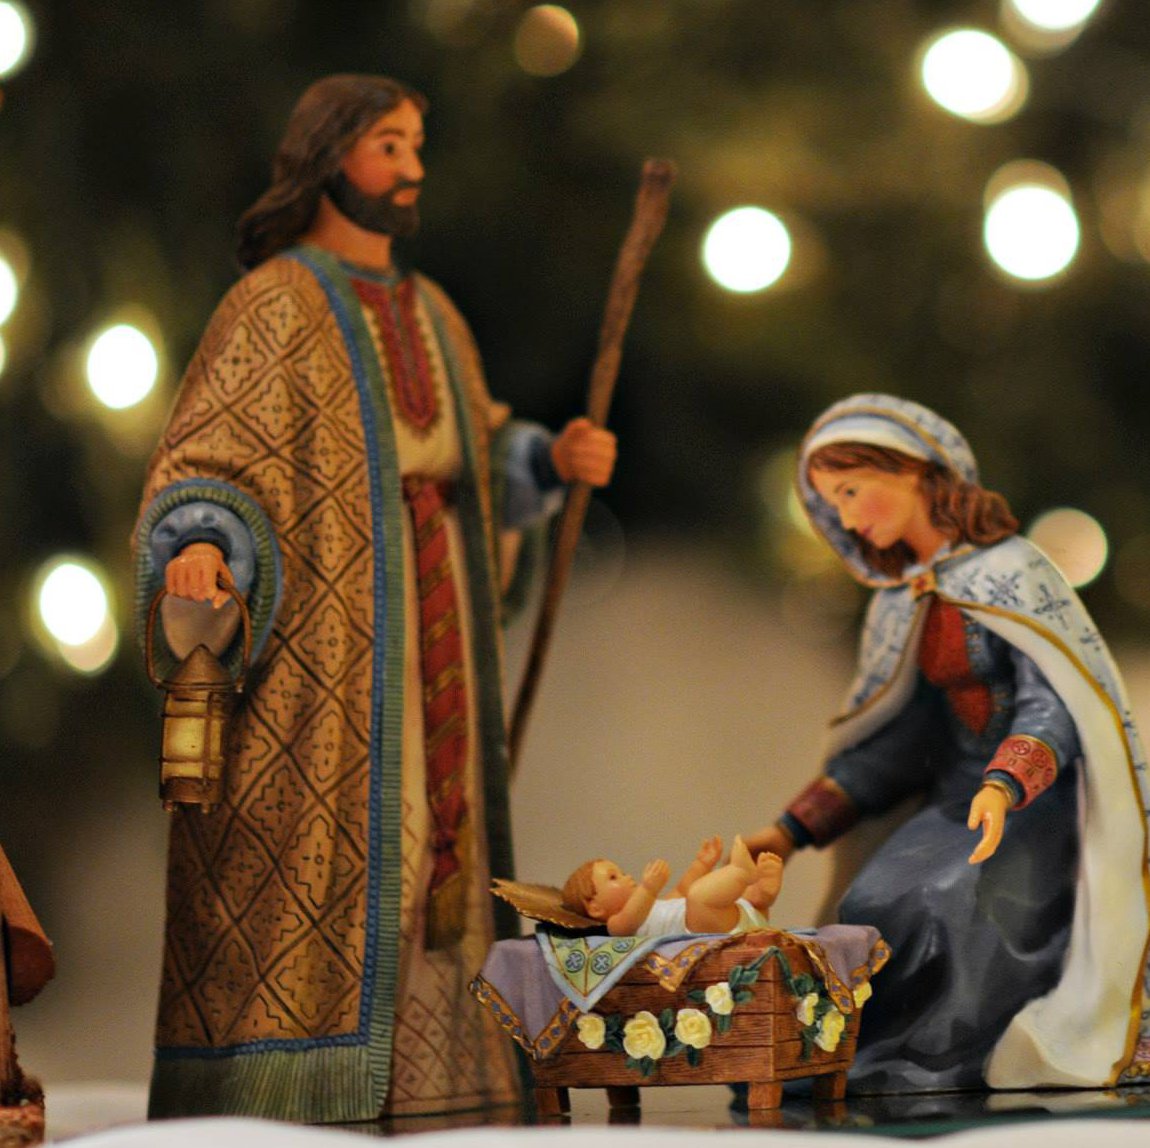 View Christmas nativity scenes from around the world.